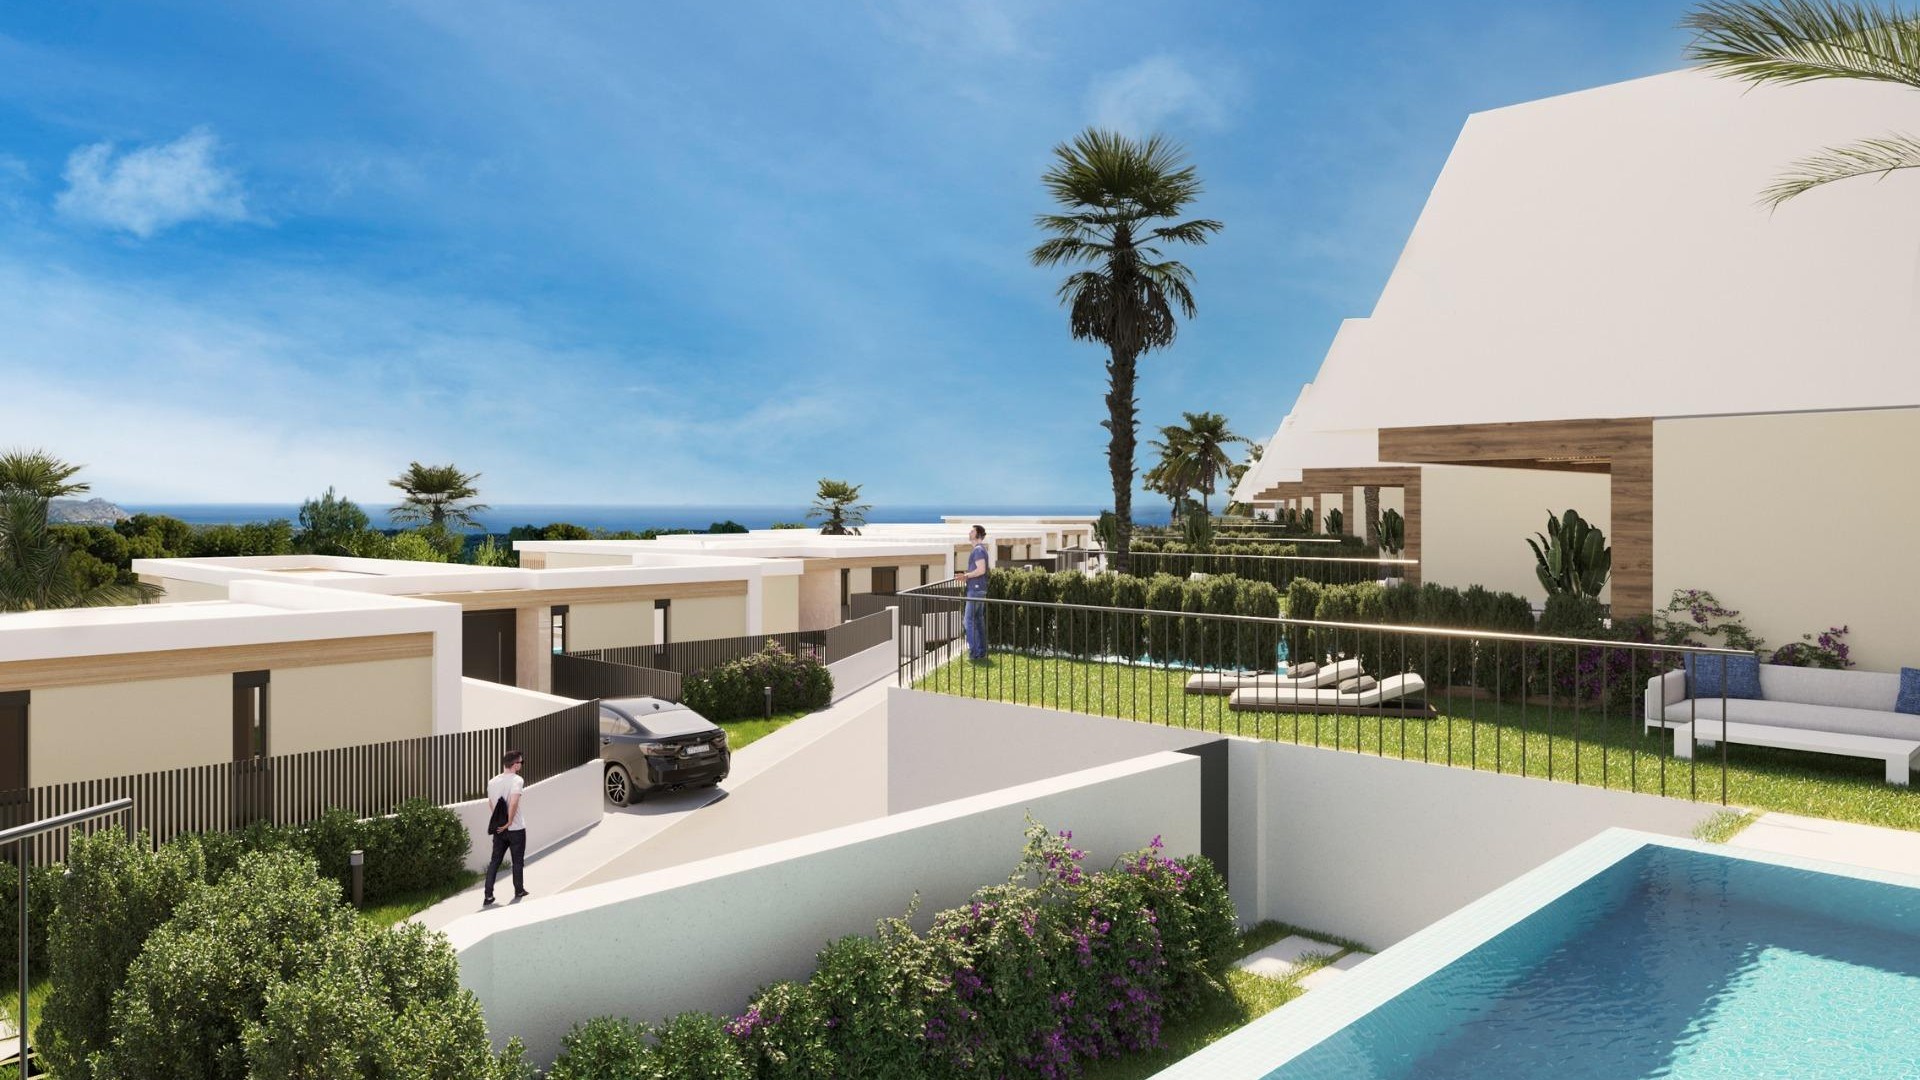 Villas/houses in Polop, Alicante-North, 2/3 bedrooms, 2 bathrooms, terraces with panoramic views, gardens, verandas and solarium in each house, possibility of pool